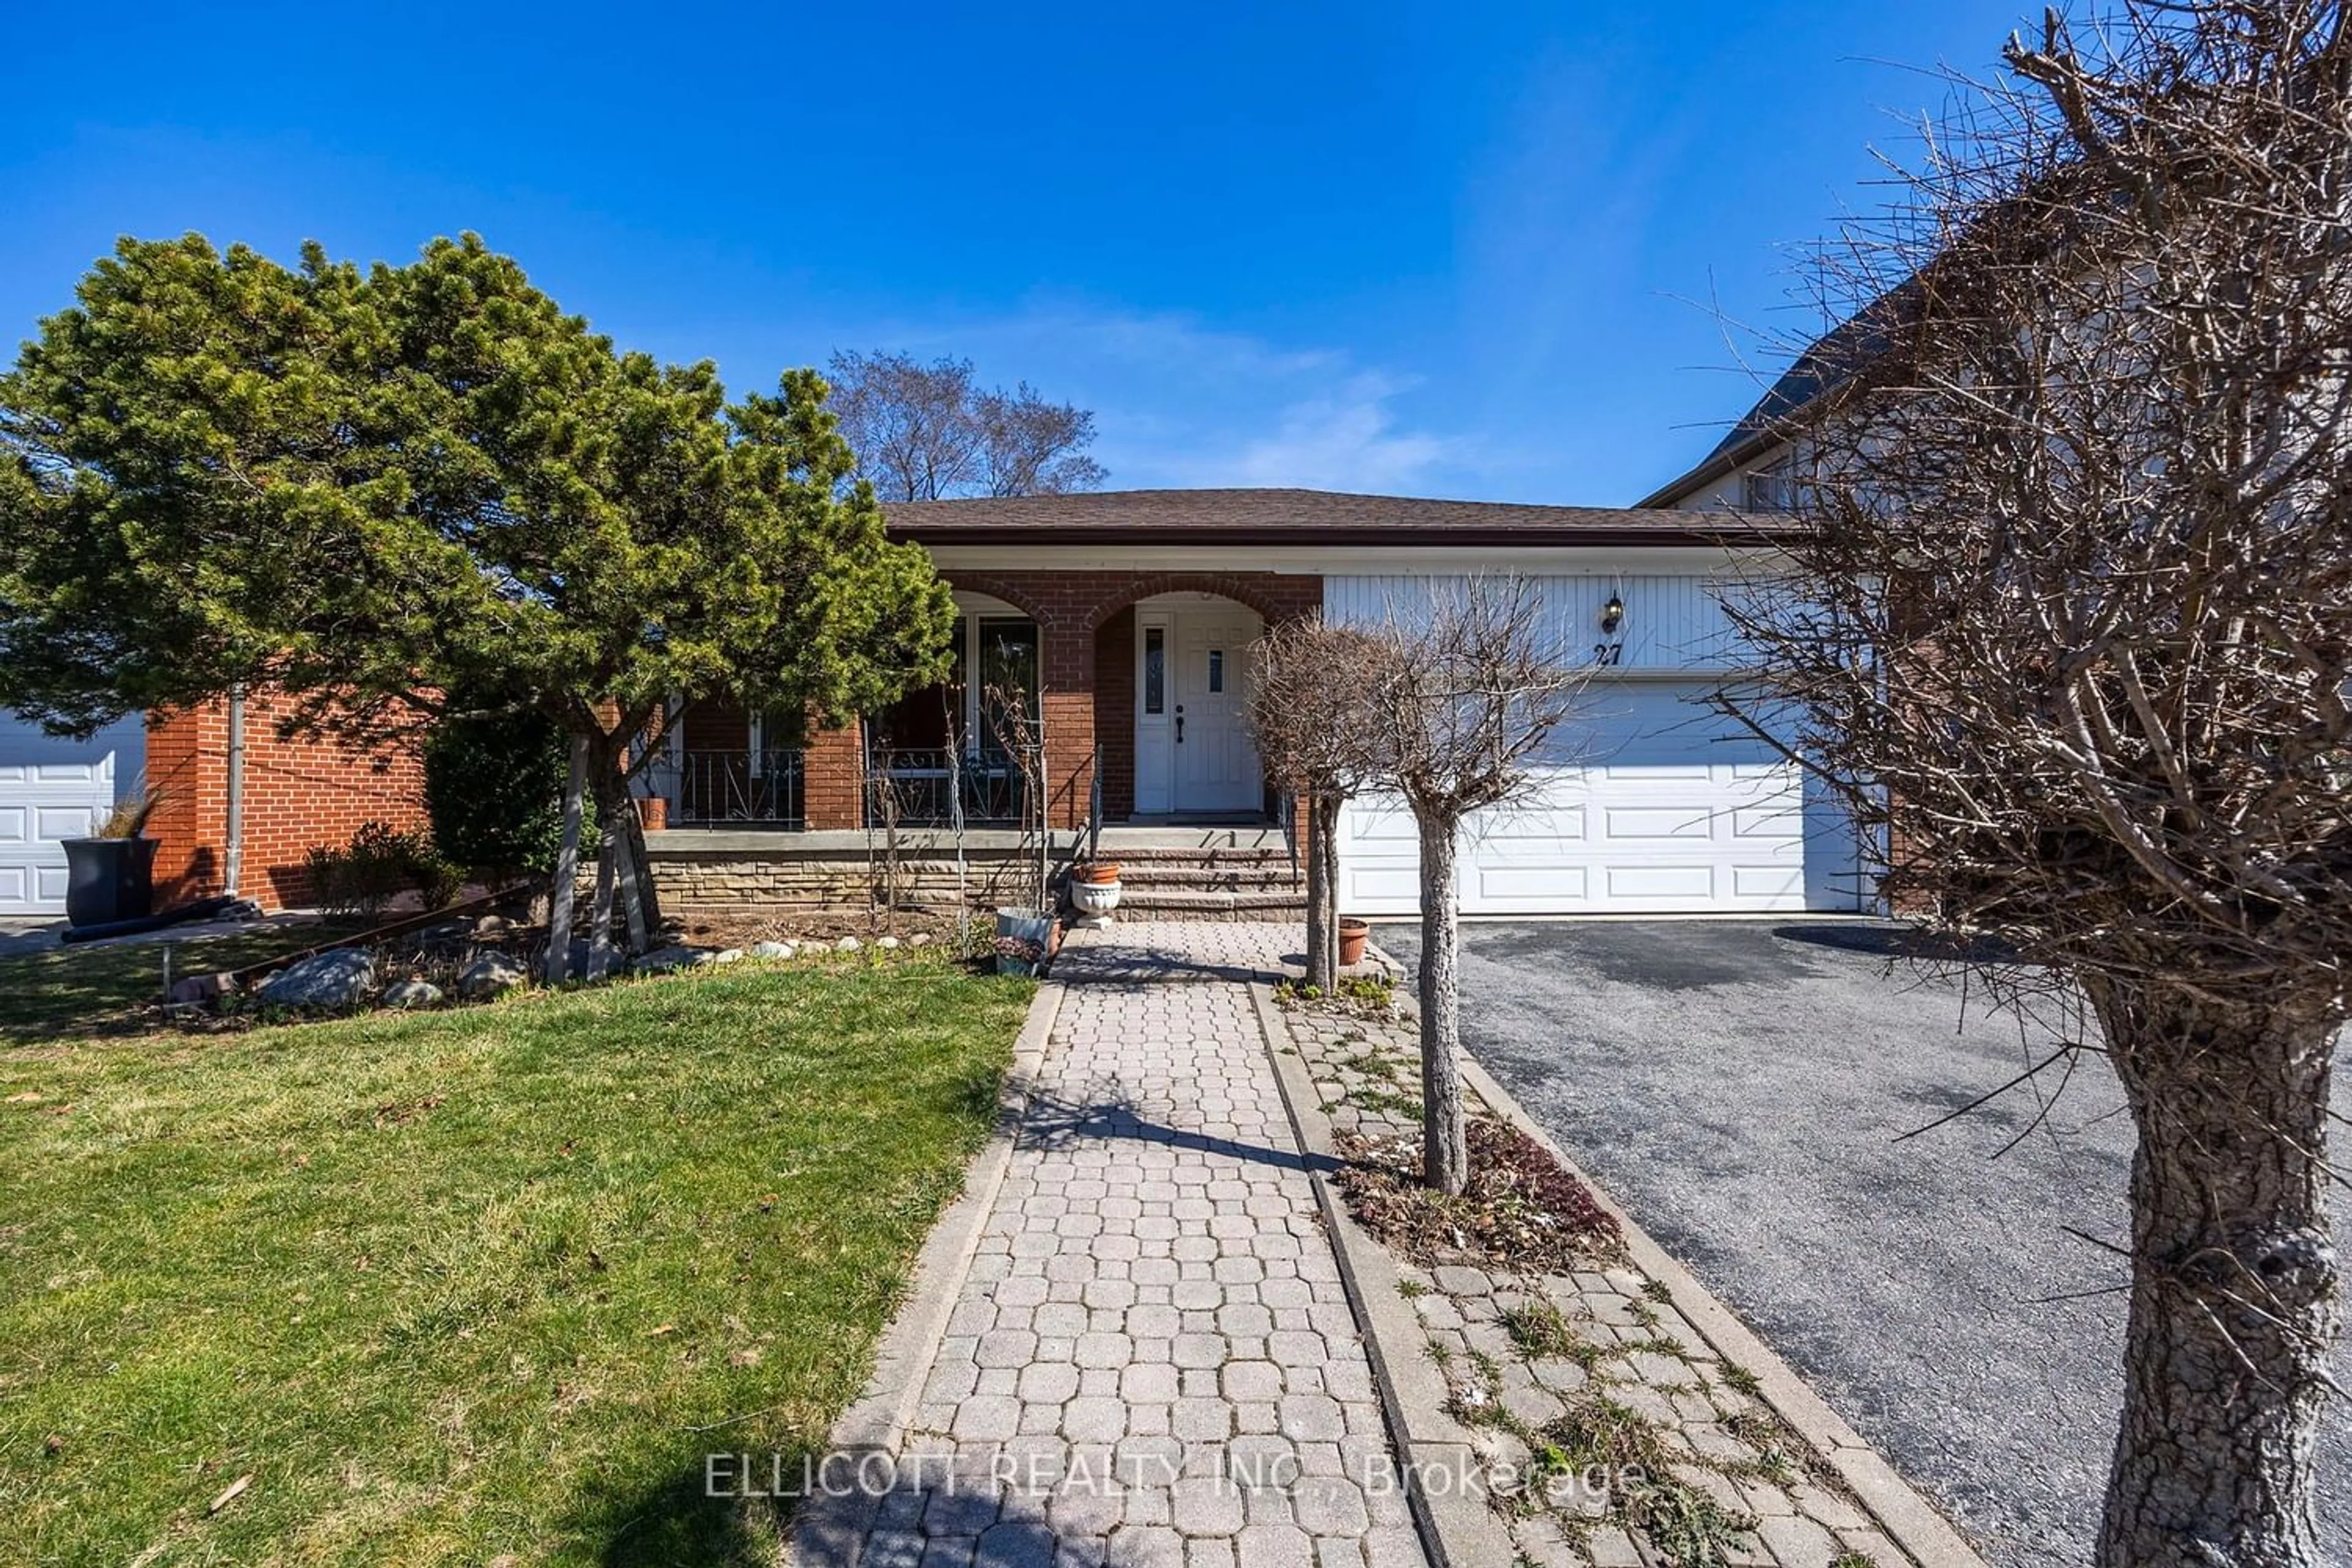 Home with brick exterior material for 27 Woodbank Rd, Toronto Ontario M9B 5C3